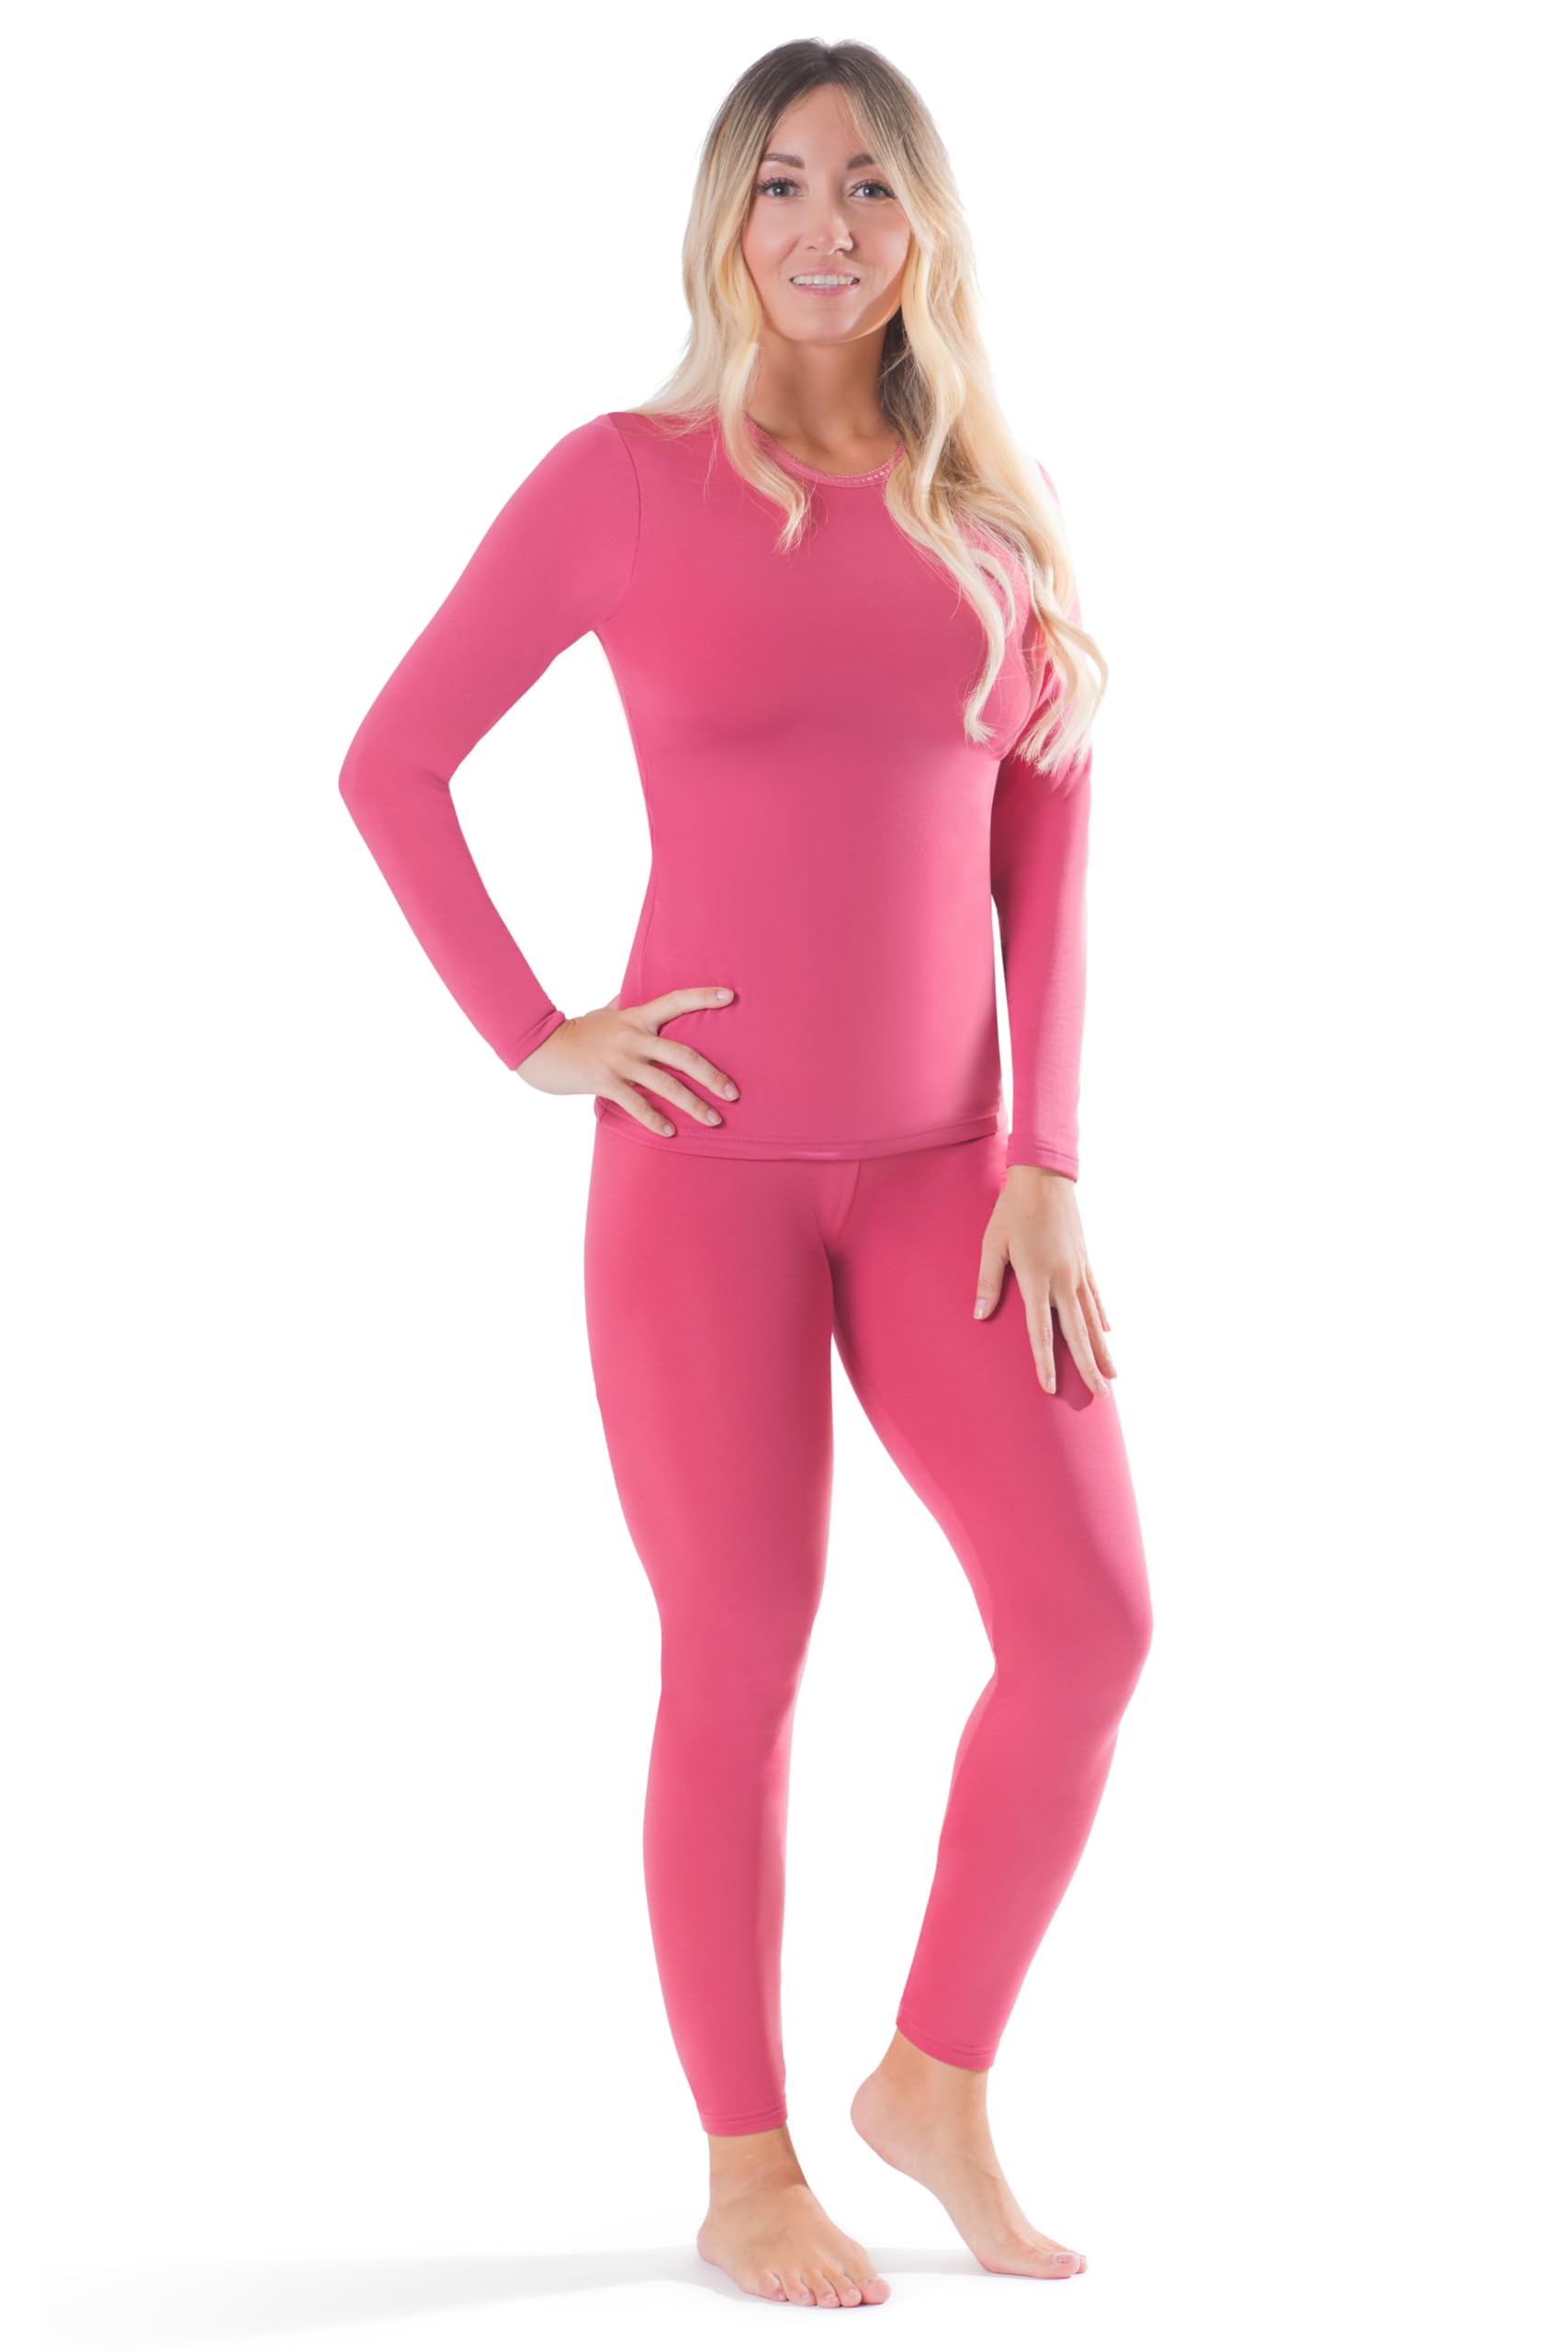 Buy Rocky Thermal Underwear for Women (Long Johns Thermals Set) Shirt &  Pants, Base Layer w/Leggings/Bottoms Ski/Extreme Cold